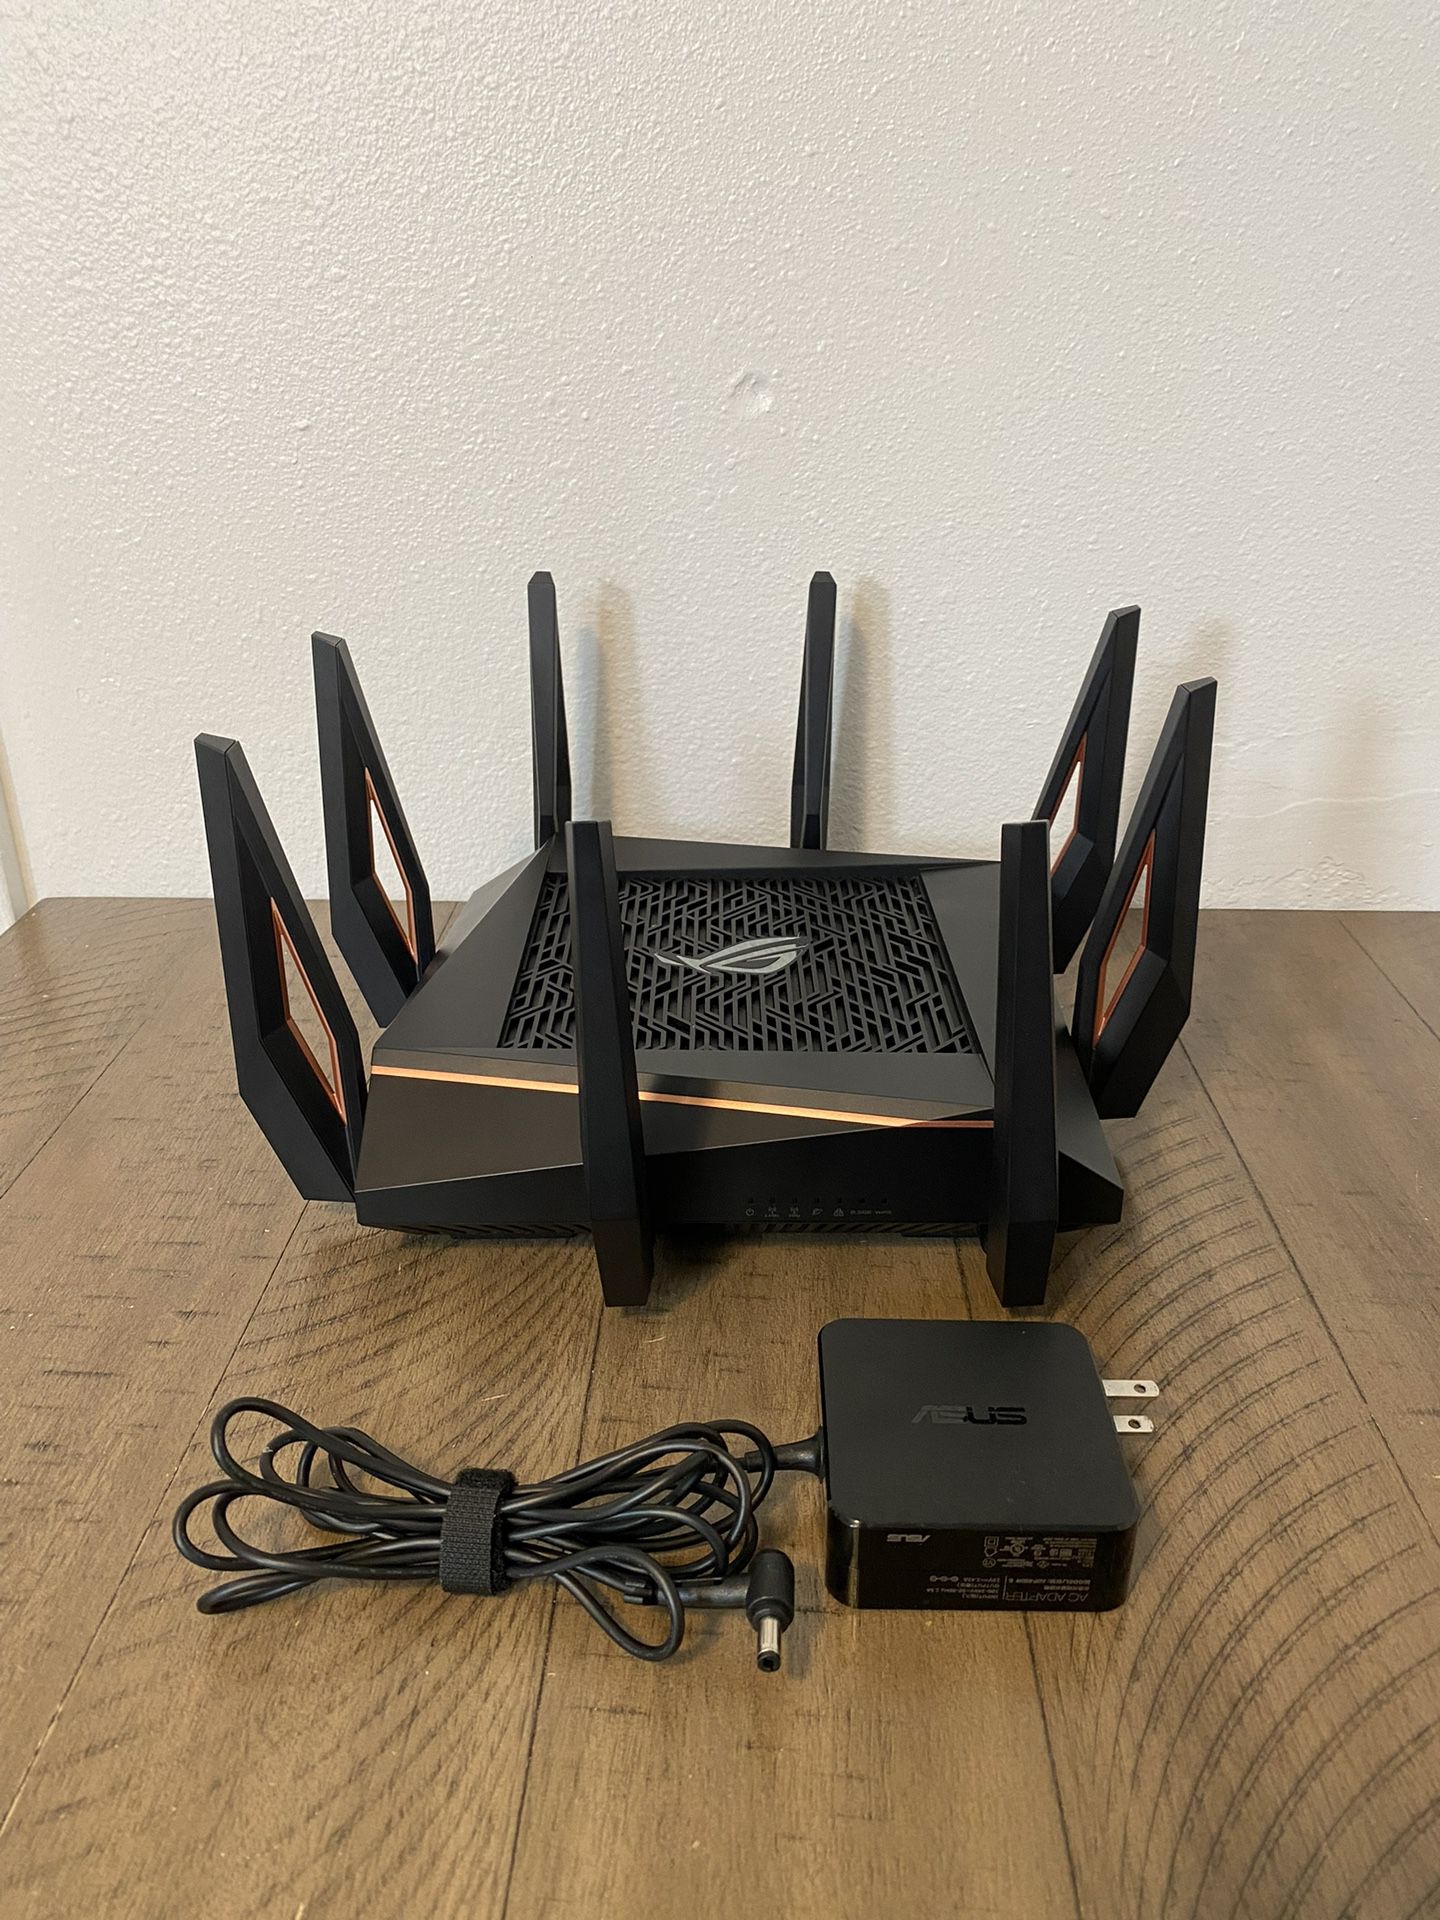 Asus router GT-AX11000